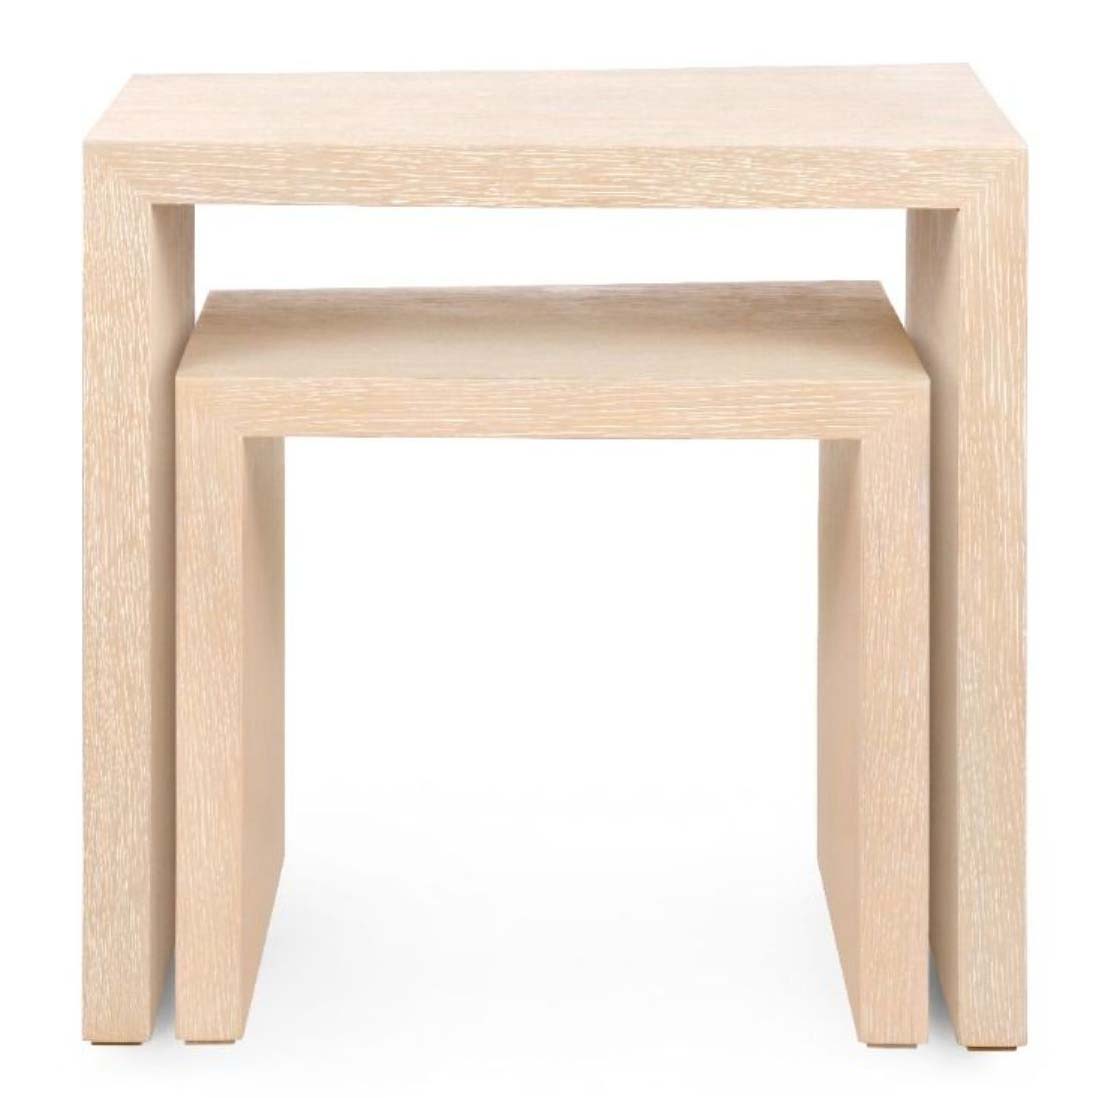 LUCY NESTING TABLES - Set of 2 Nesting Tables